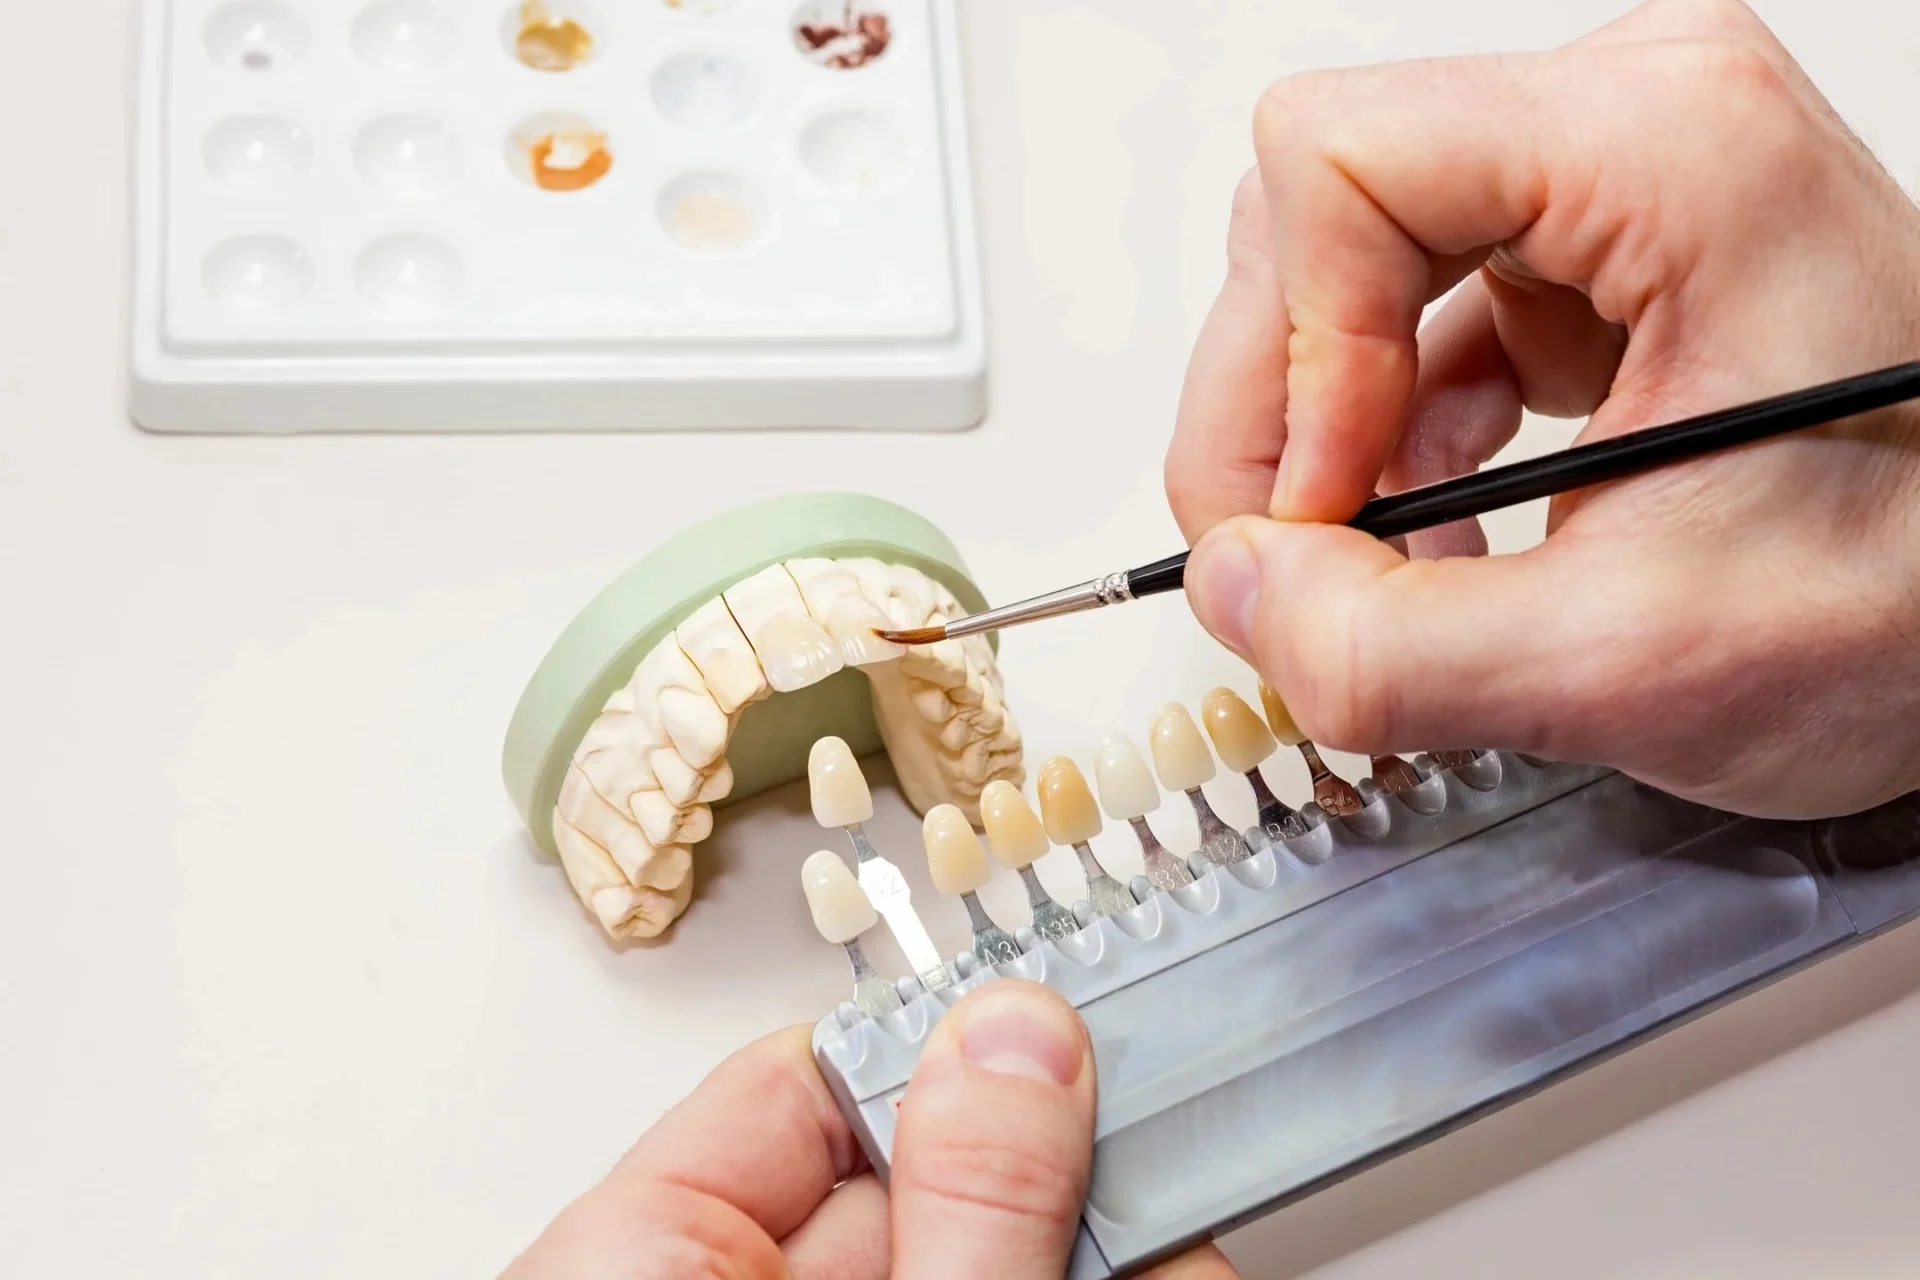 A person is painting teeth with a brush.